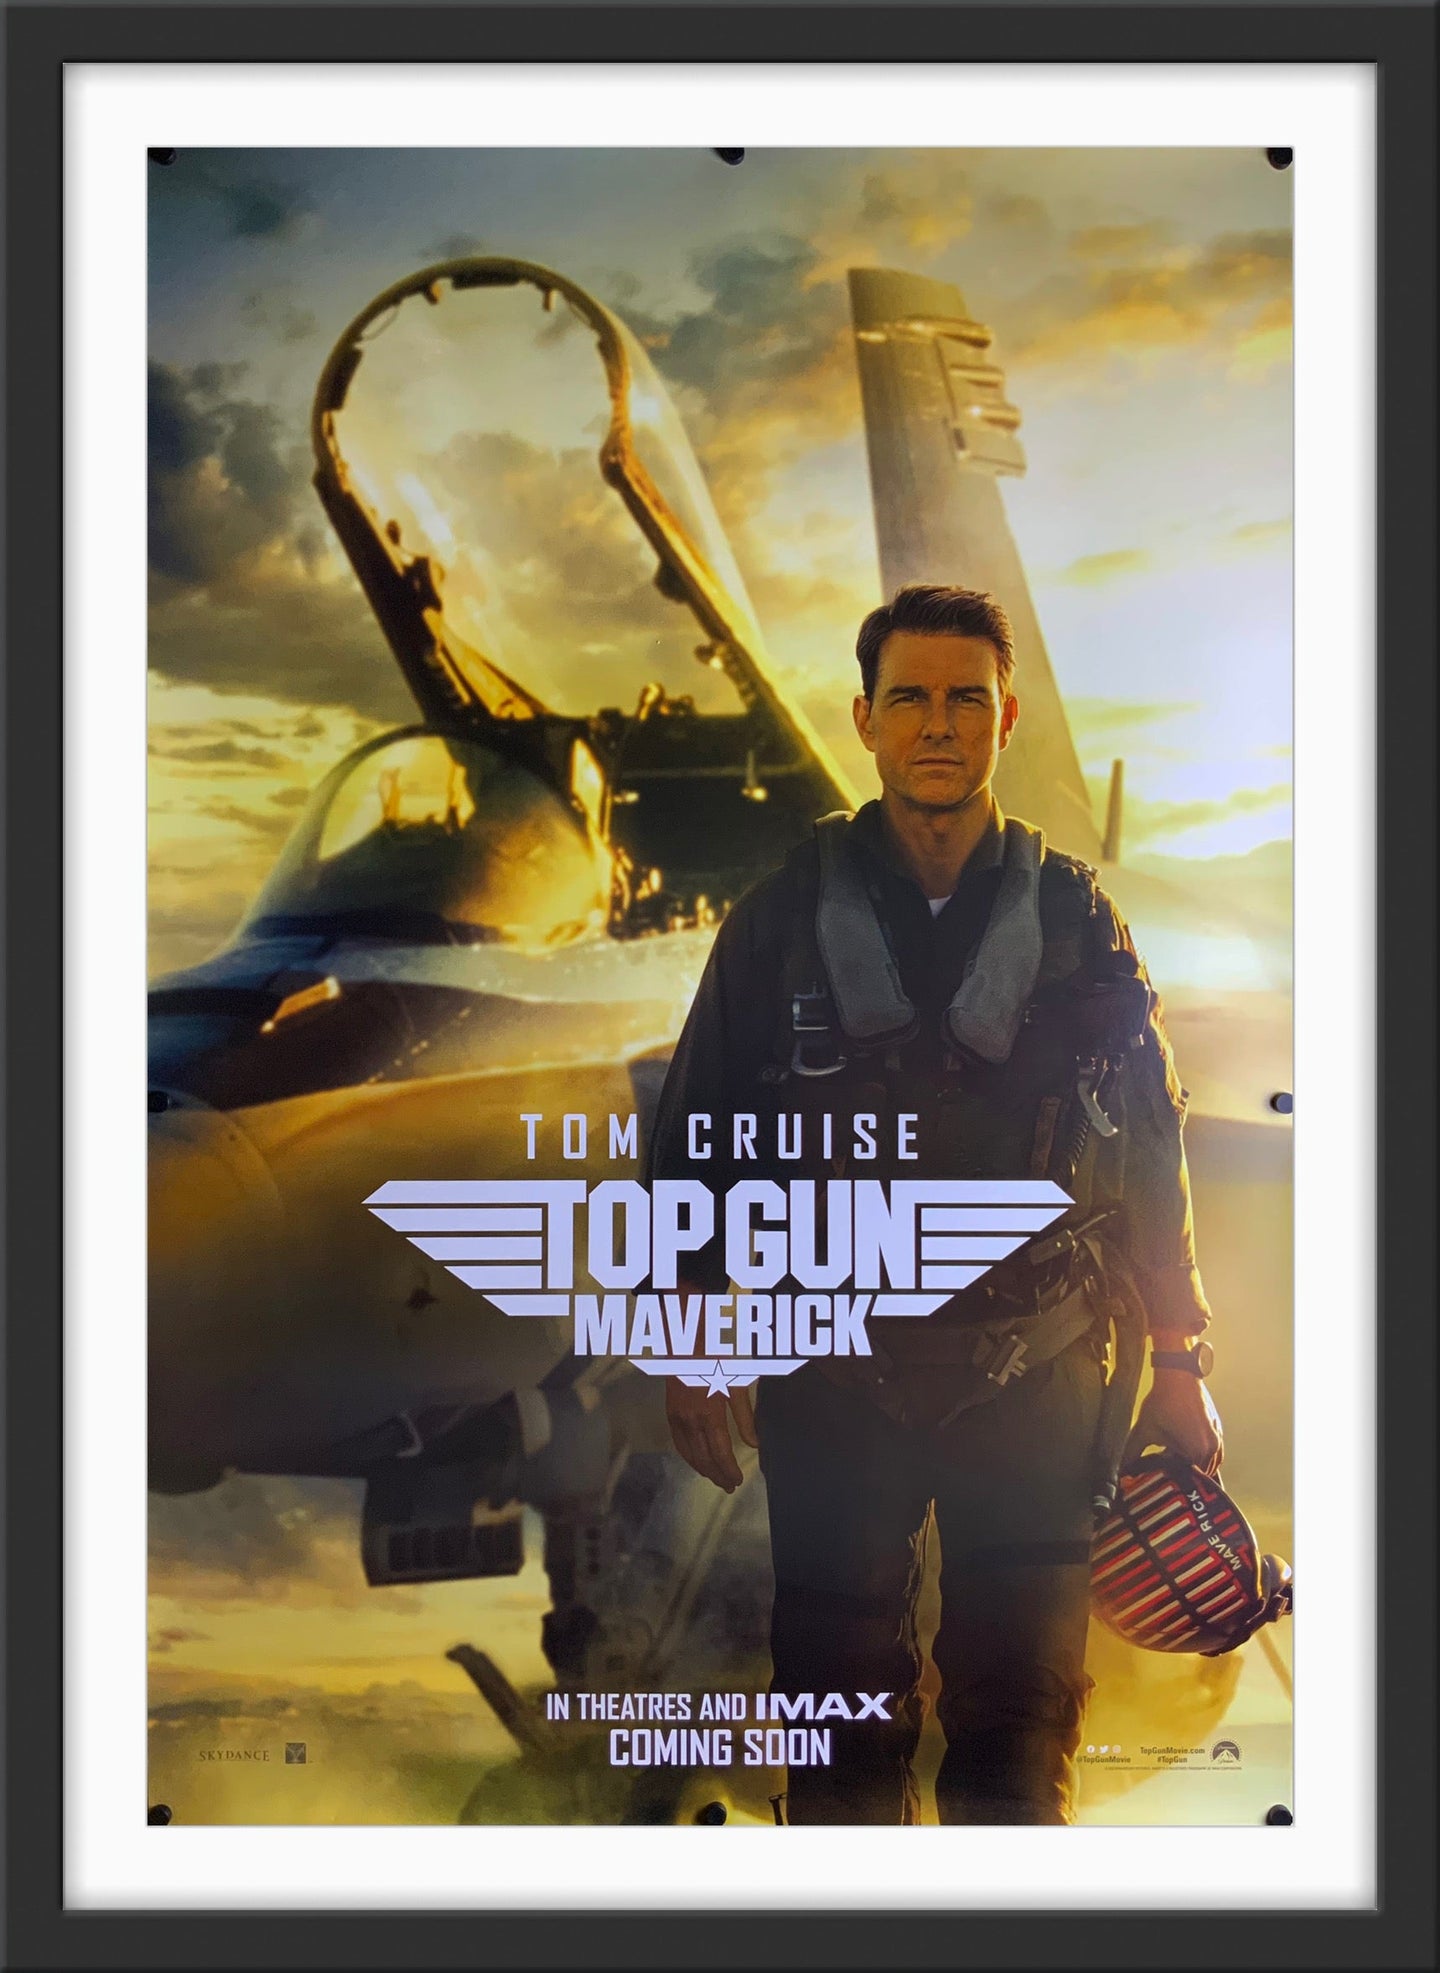 An original movie poster for the To Cruise film Top Gun MaverickAn original movie poster for the Tom Cruise film Top Gun Maverick